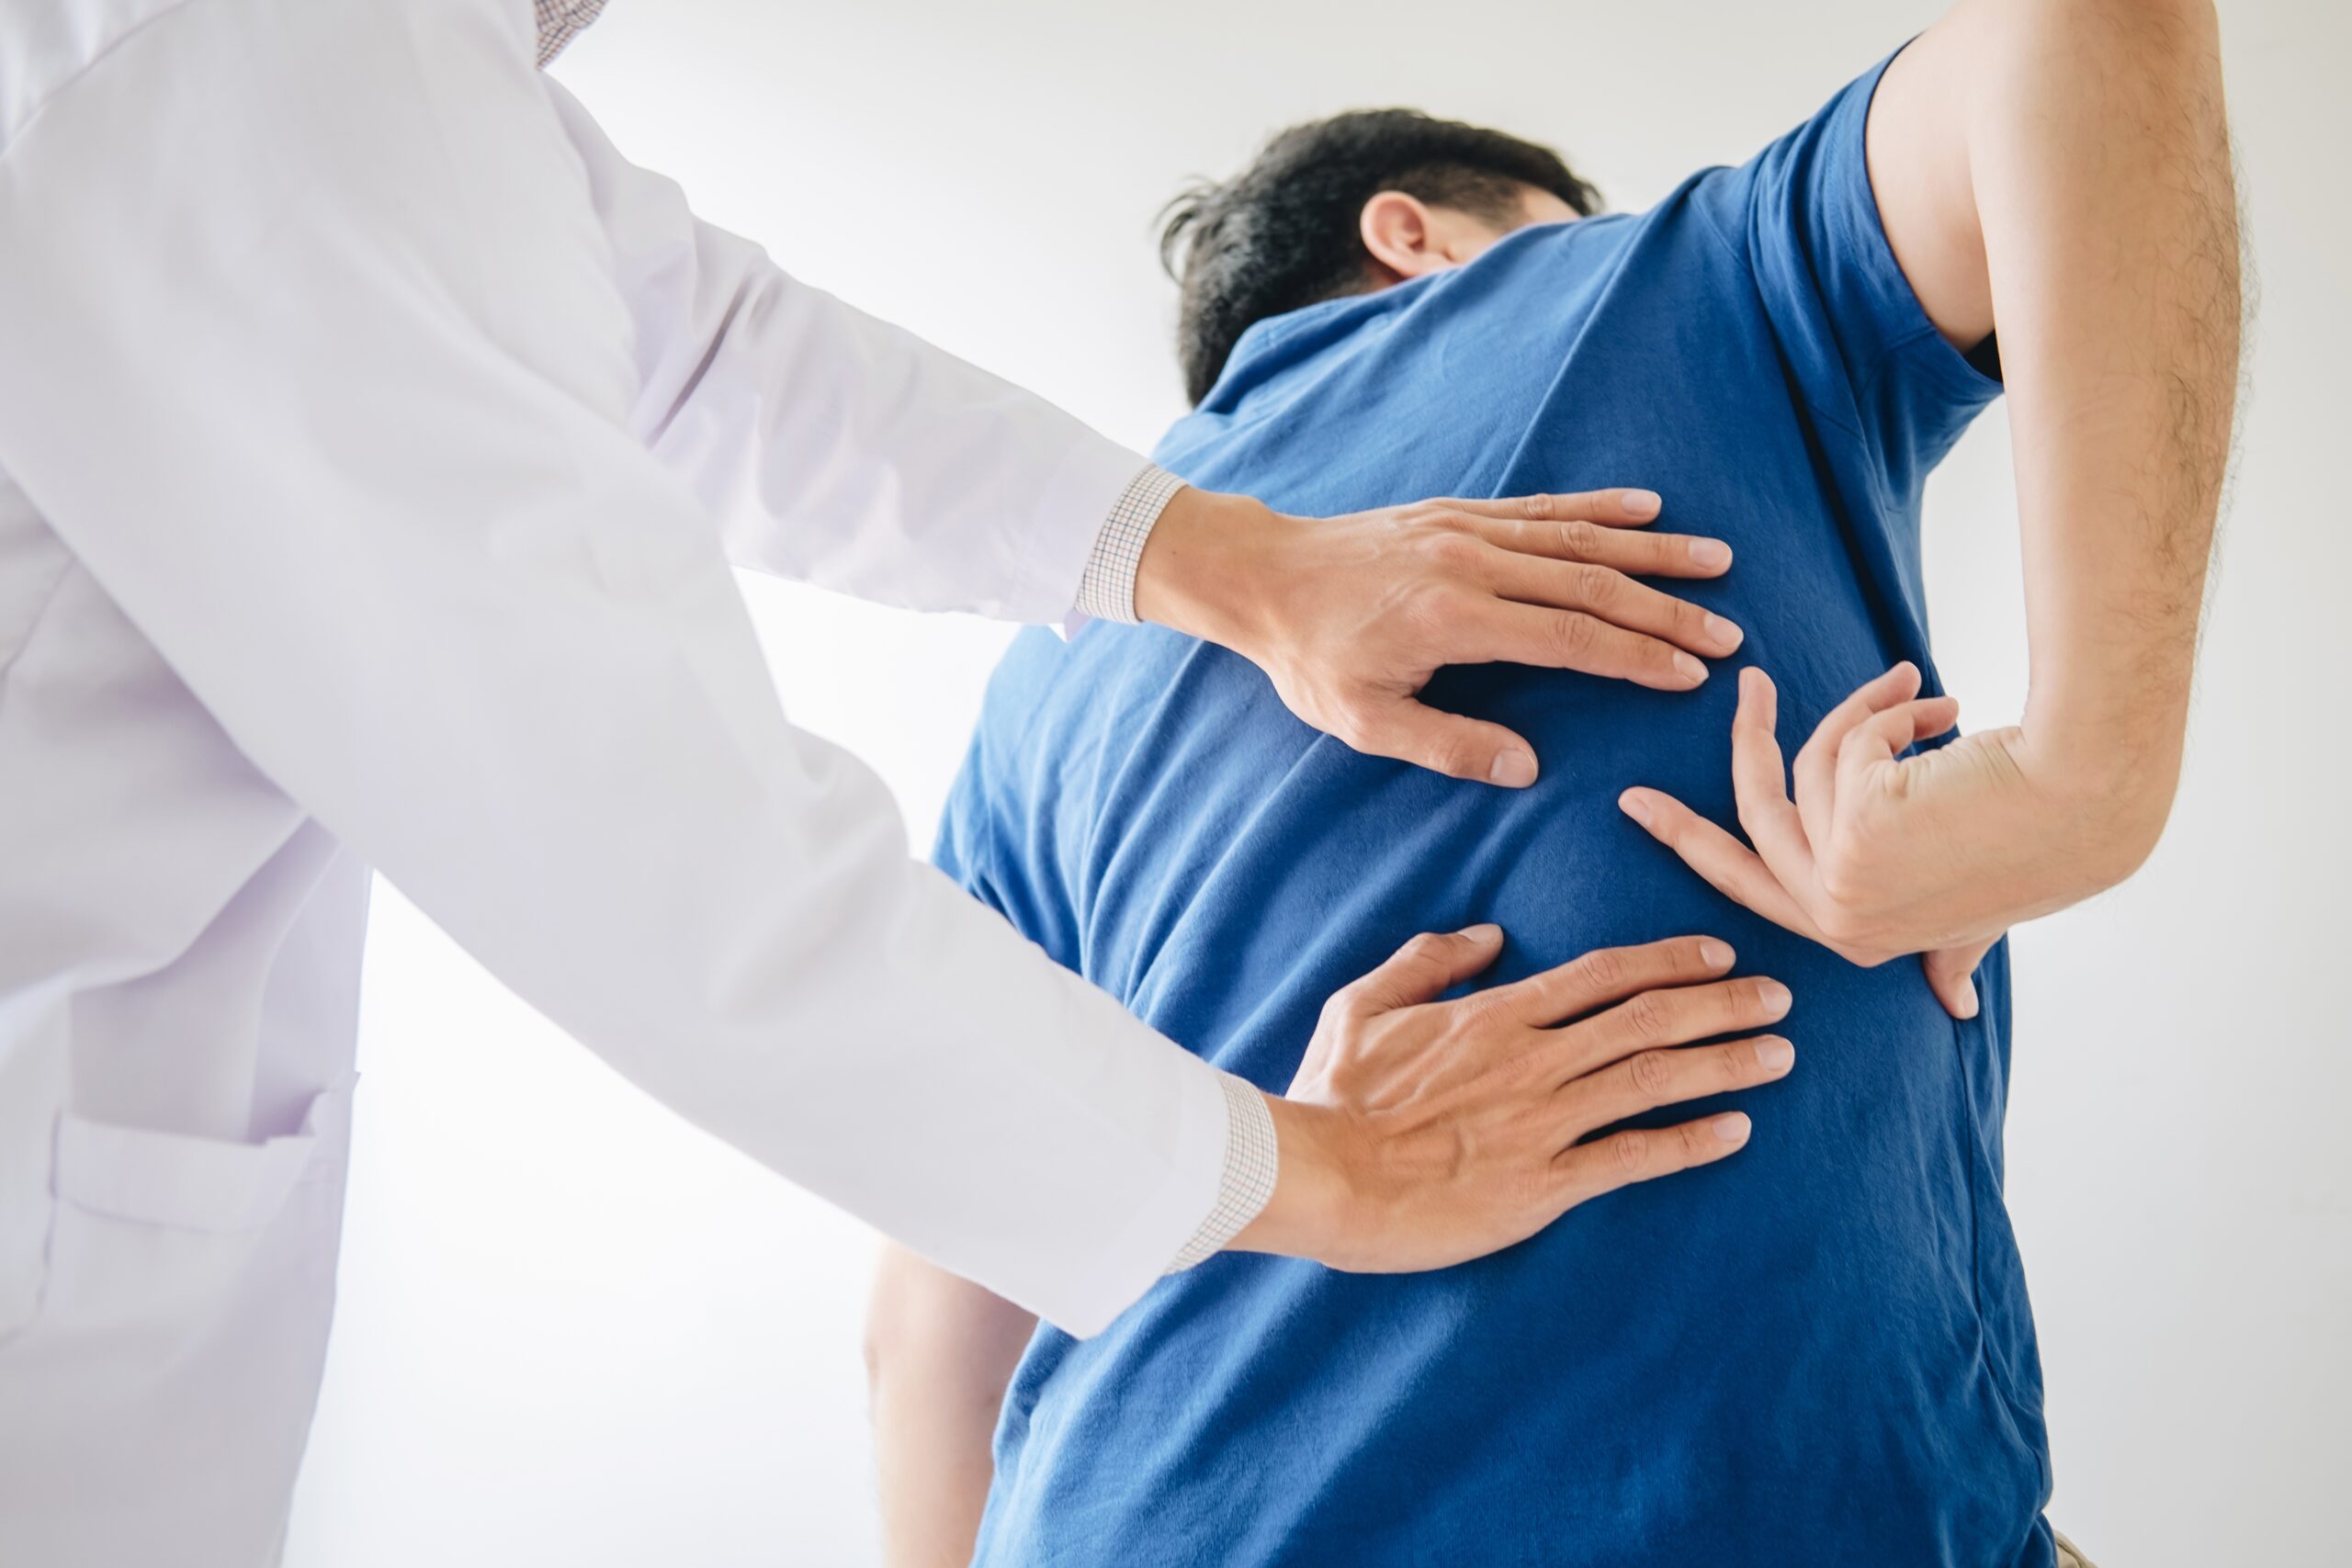 Doctor physiotherapist treating lower back pain patient after wh